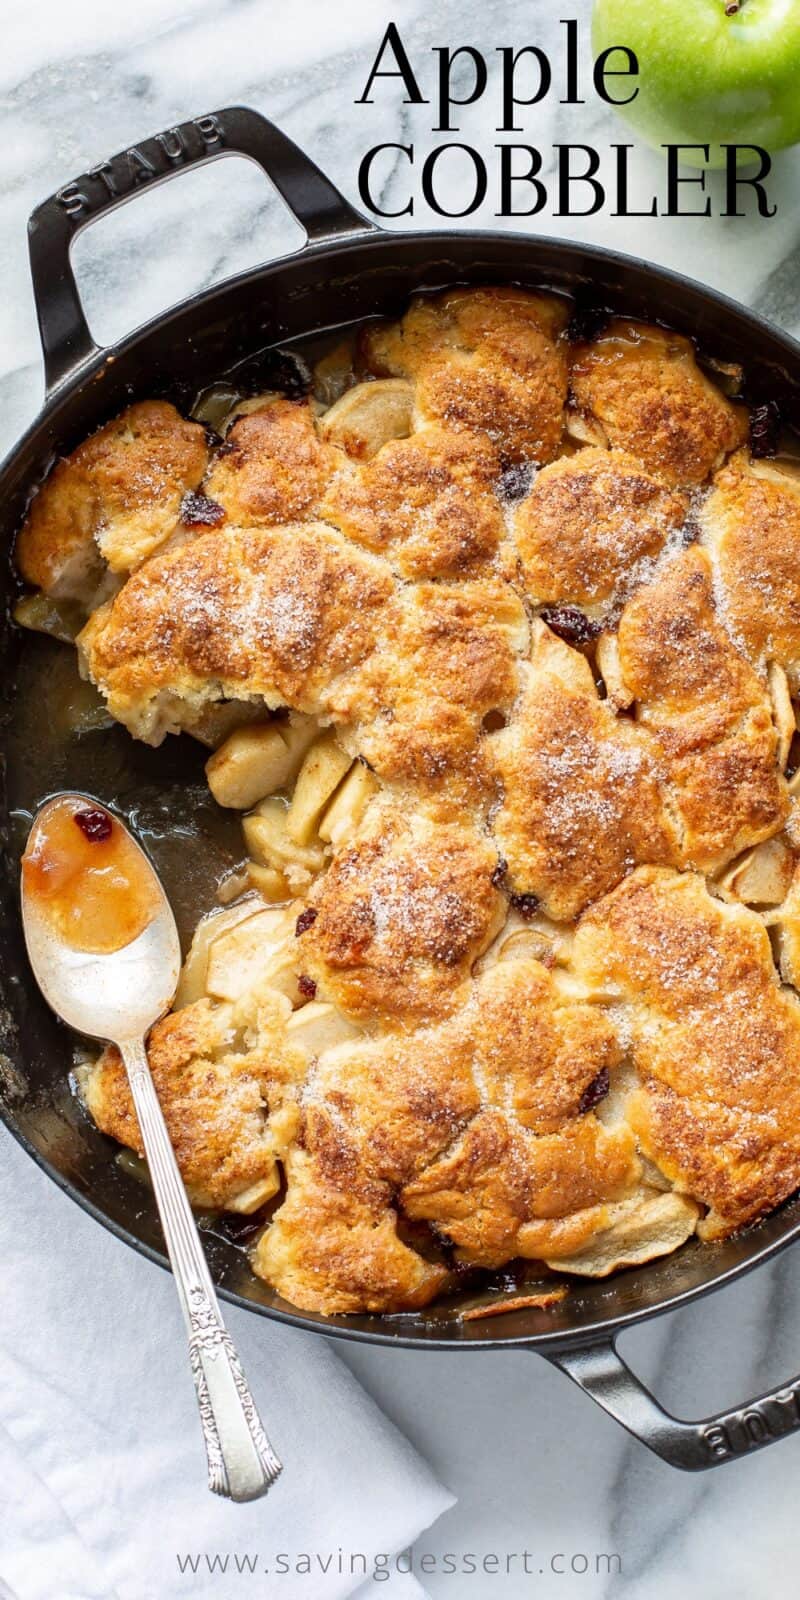 A skillet filled with rustic apple cobbler with cranberries